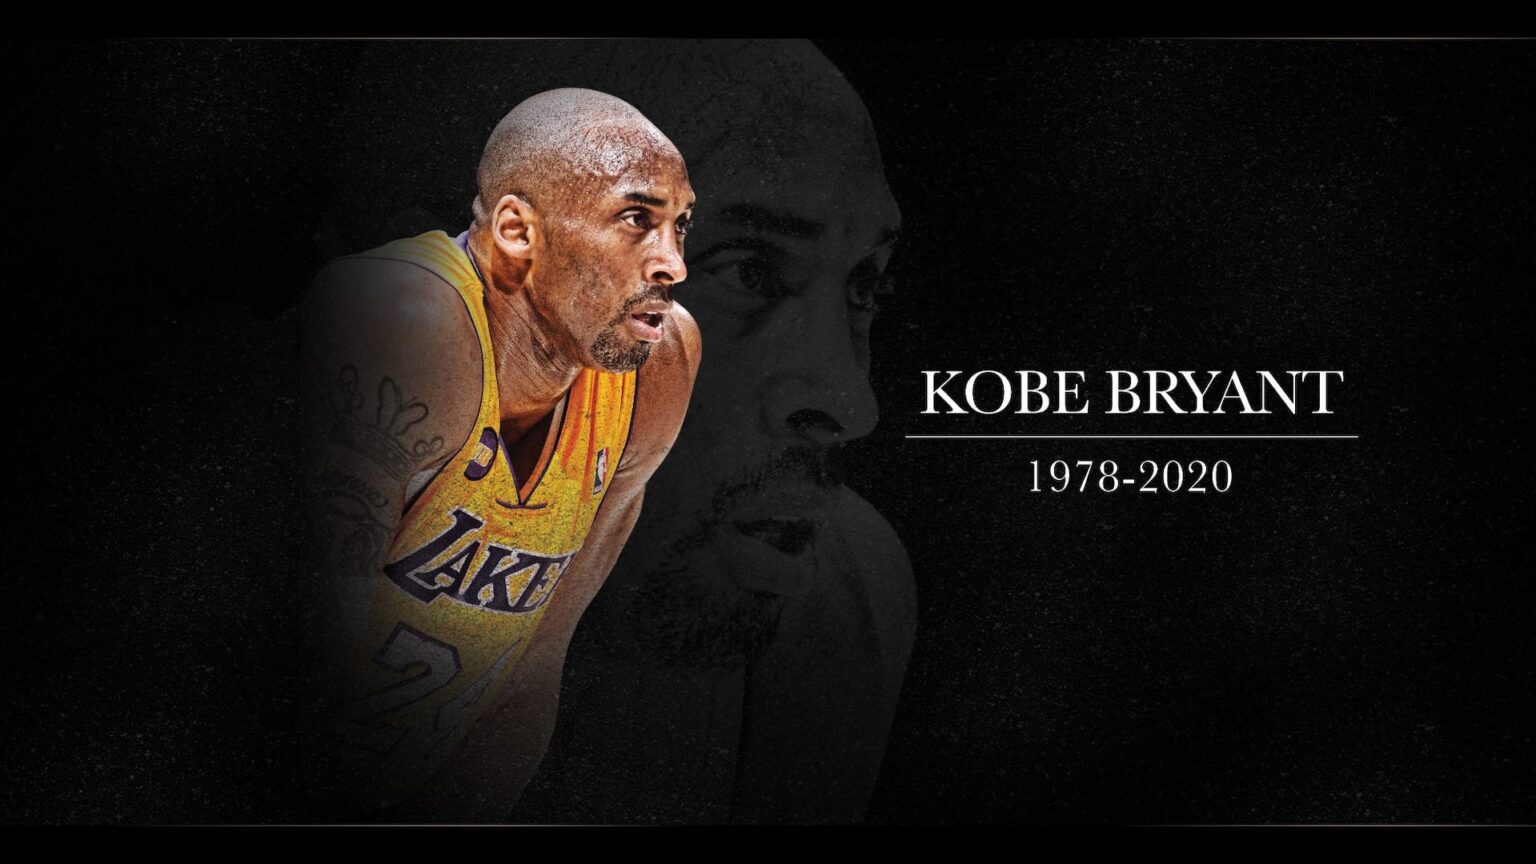 One year later, we remember Kobe Bryant through moving tributes & memes. Prepare the tissues because these will make you sob.